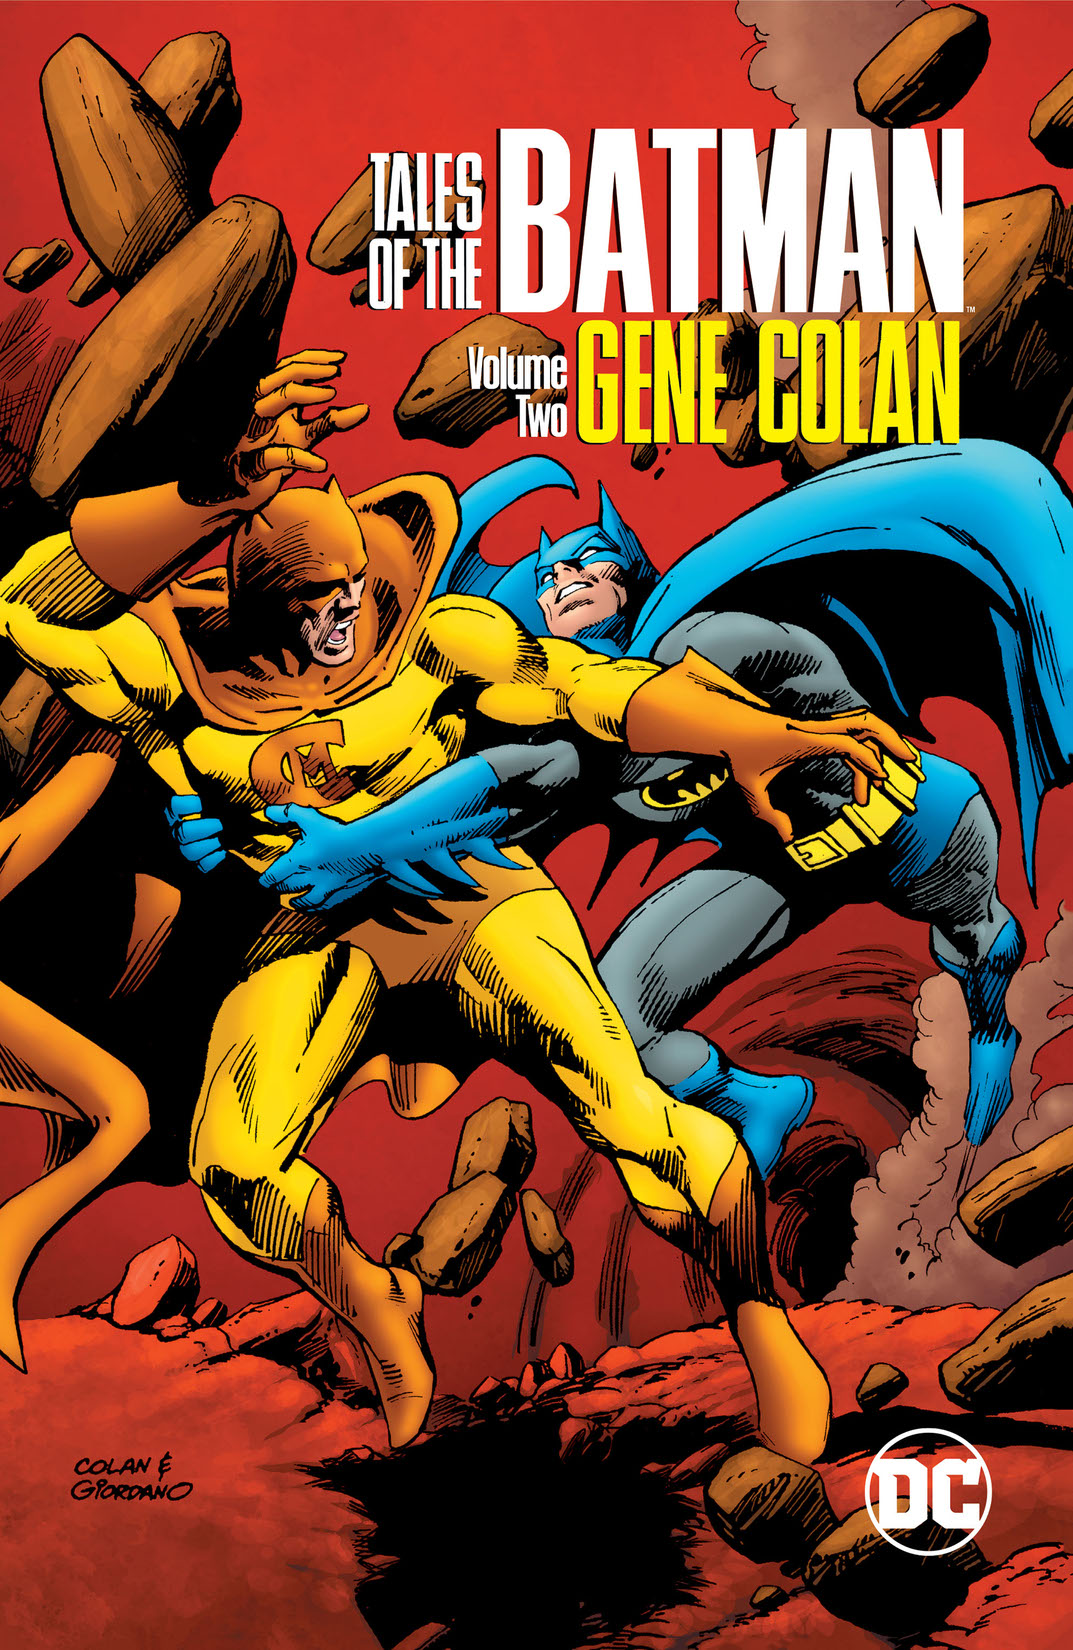 Tales of the Batman: Gene Colan Vol. 2 preview images